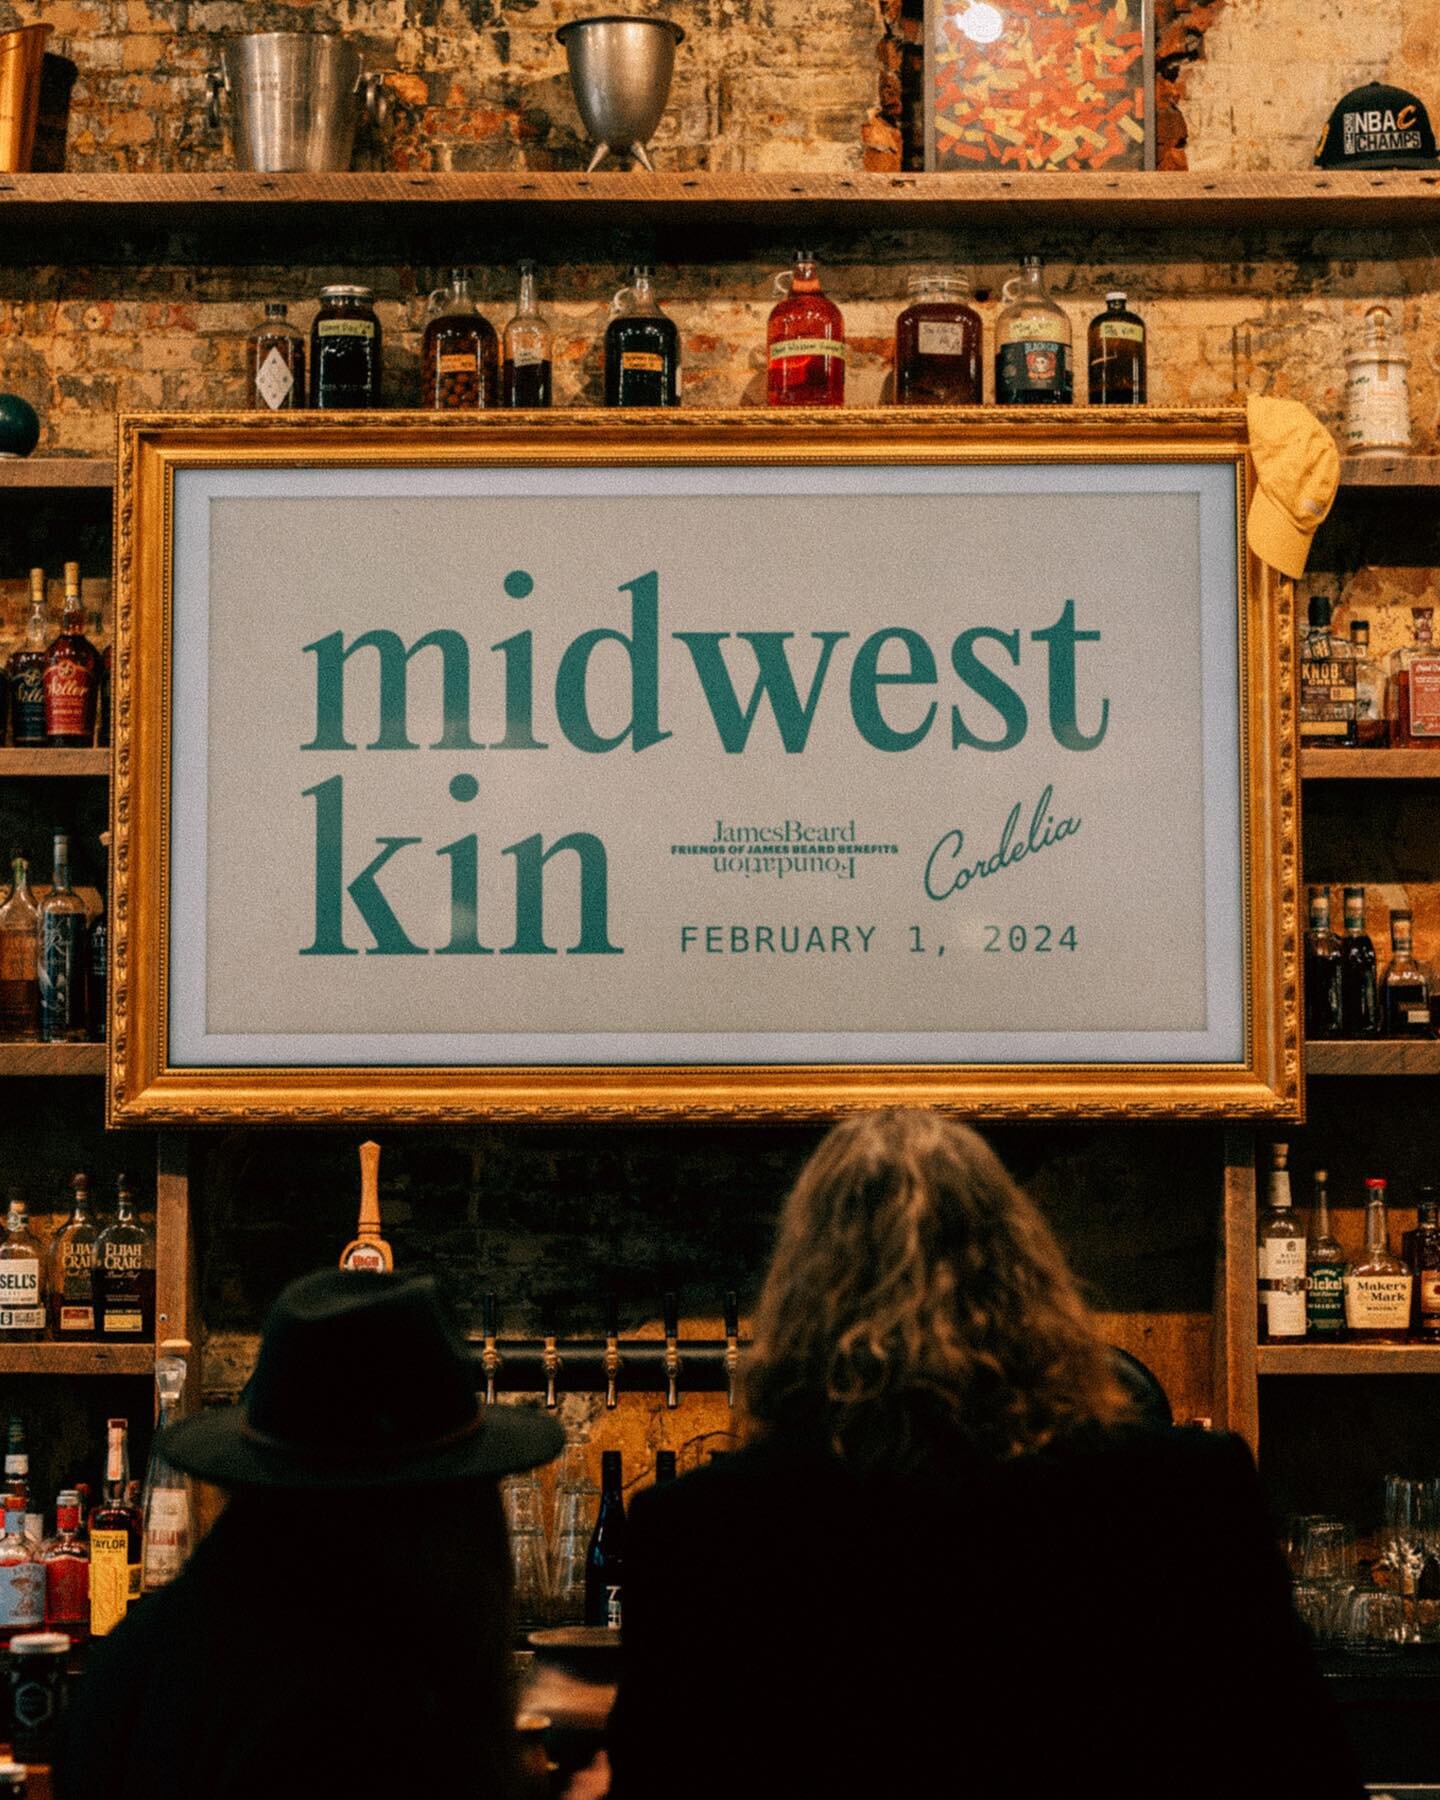 MIDWEST KIN.

Some shots from an incredible night a week ago benefiting @beardfoundation. The idea was to shine a spotlight on Cleveland, showcasing our farmers, purveyors, and friends&mdash;our Midwest Kin.

Thank you to everyone who swung by for yo